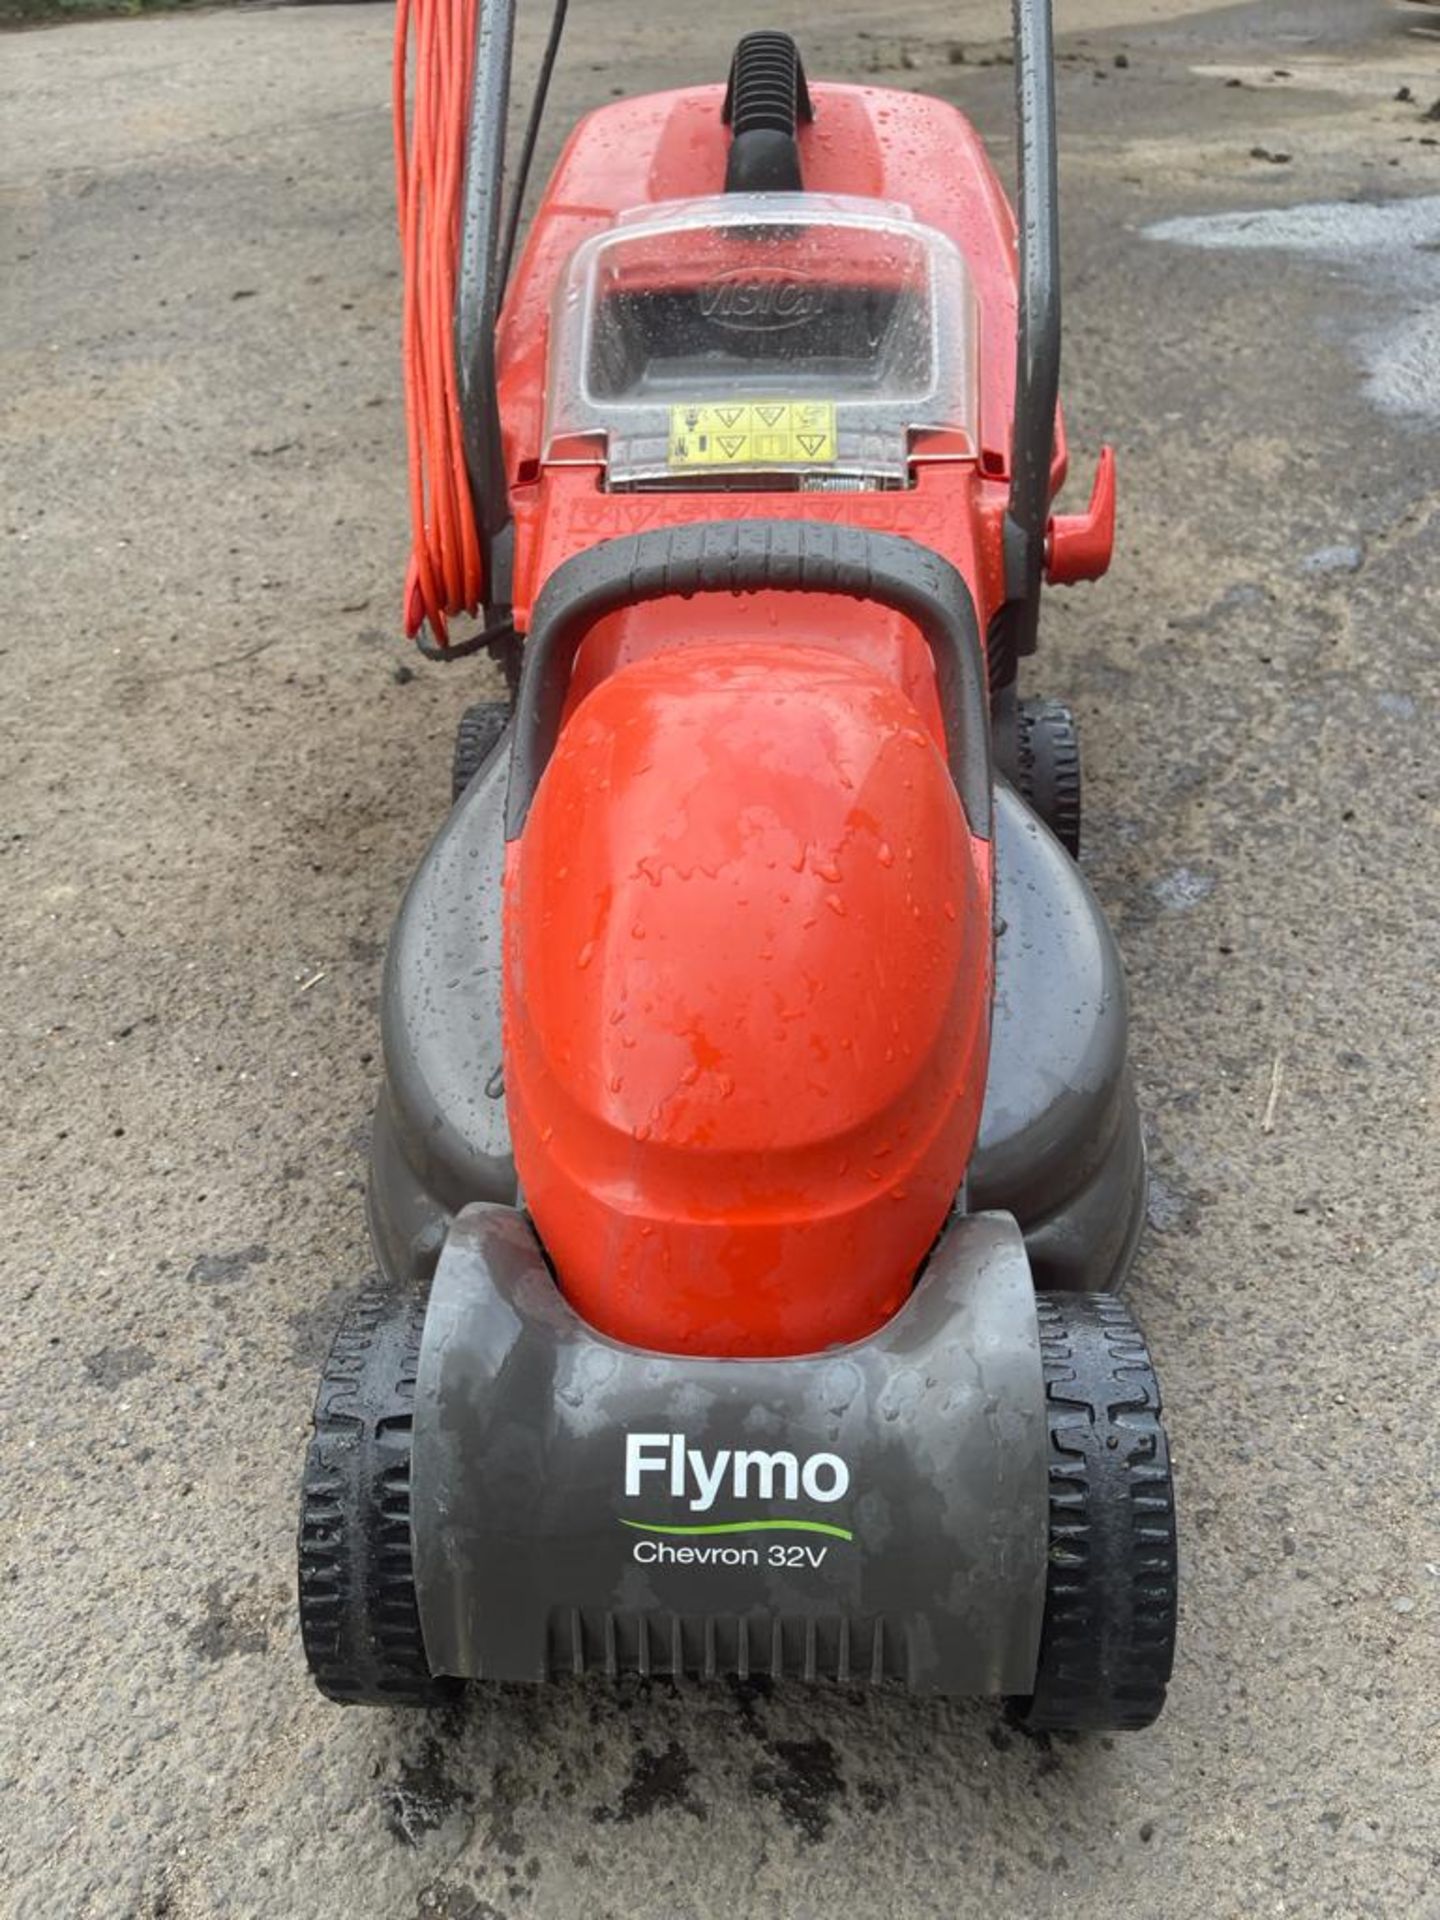 FLYMO 240v MAINS LAWN MOWER, BOUGHT 2021 BUT ONLY USED ONCE! *NO VAT* - Image 2 of 5